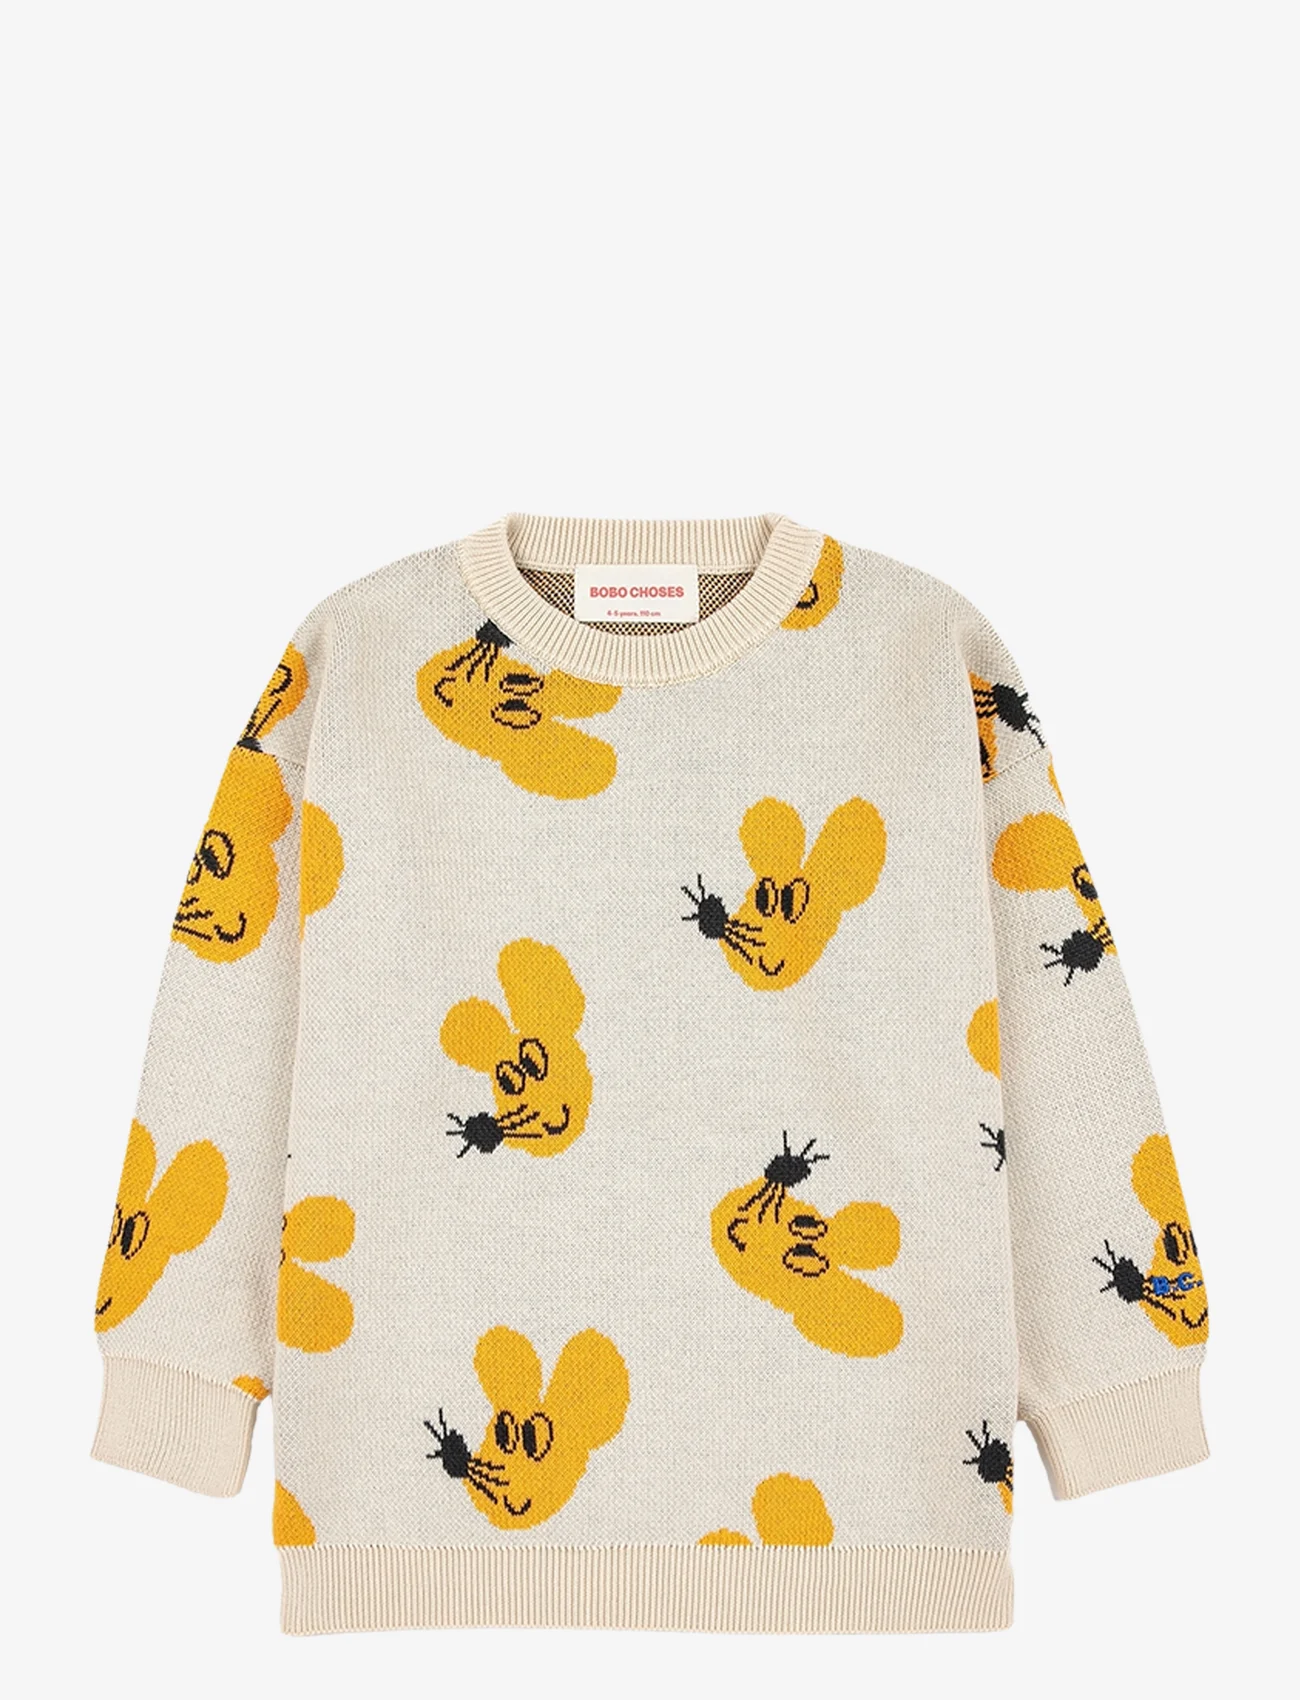 Bobo Choses - Mouse all over jacquard cotton jumper - gensere - offwhite - 0